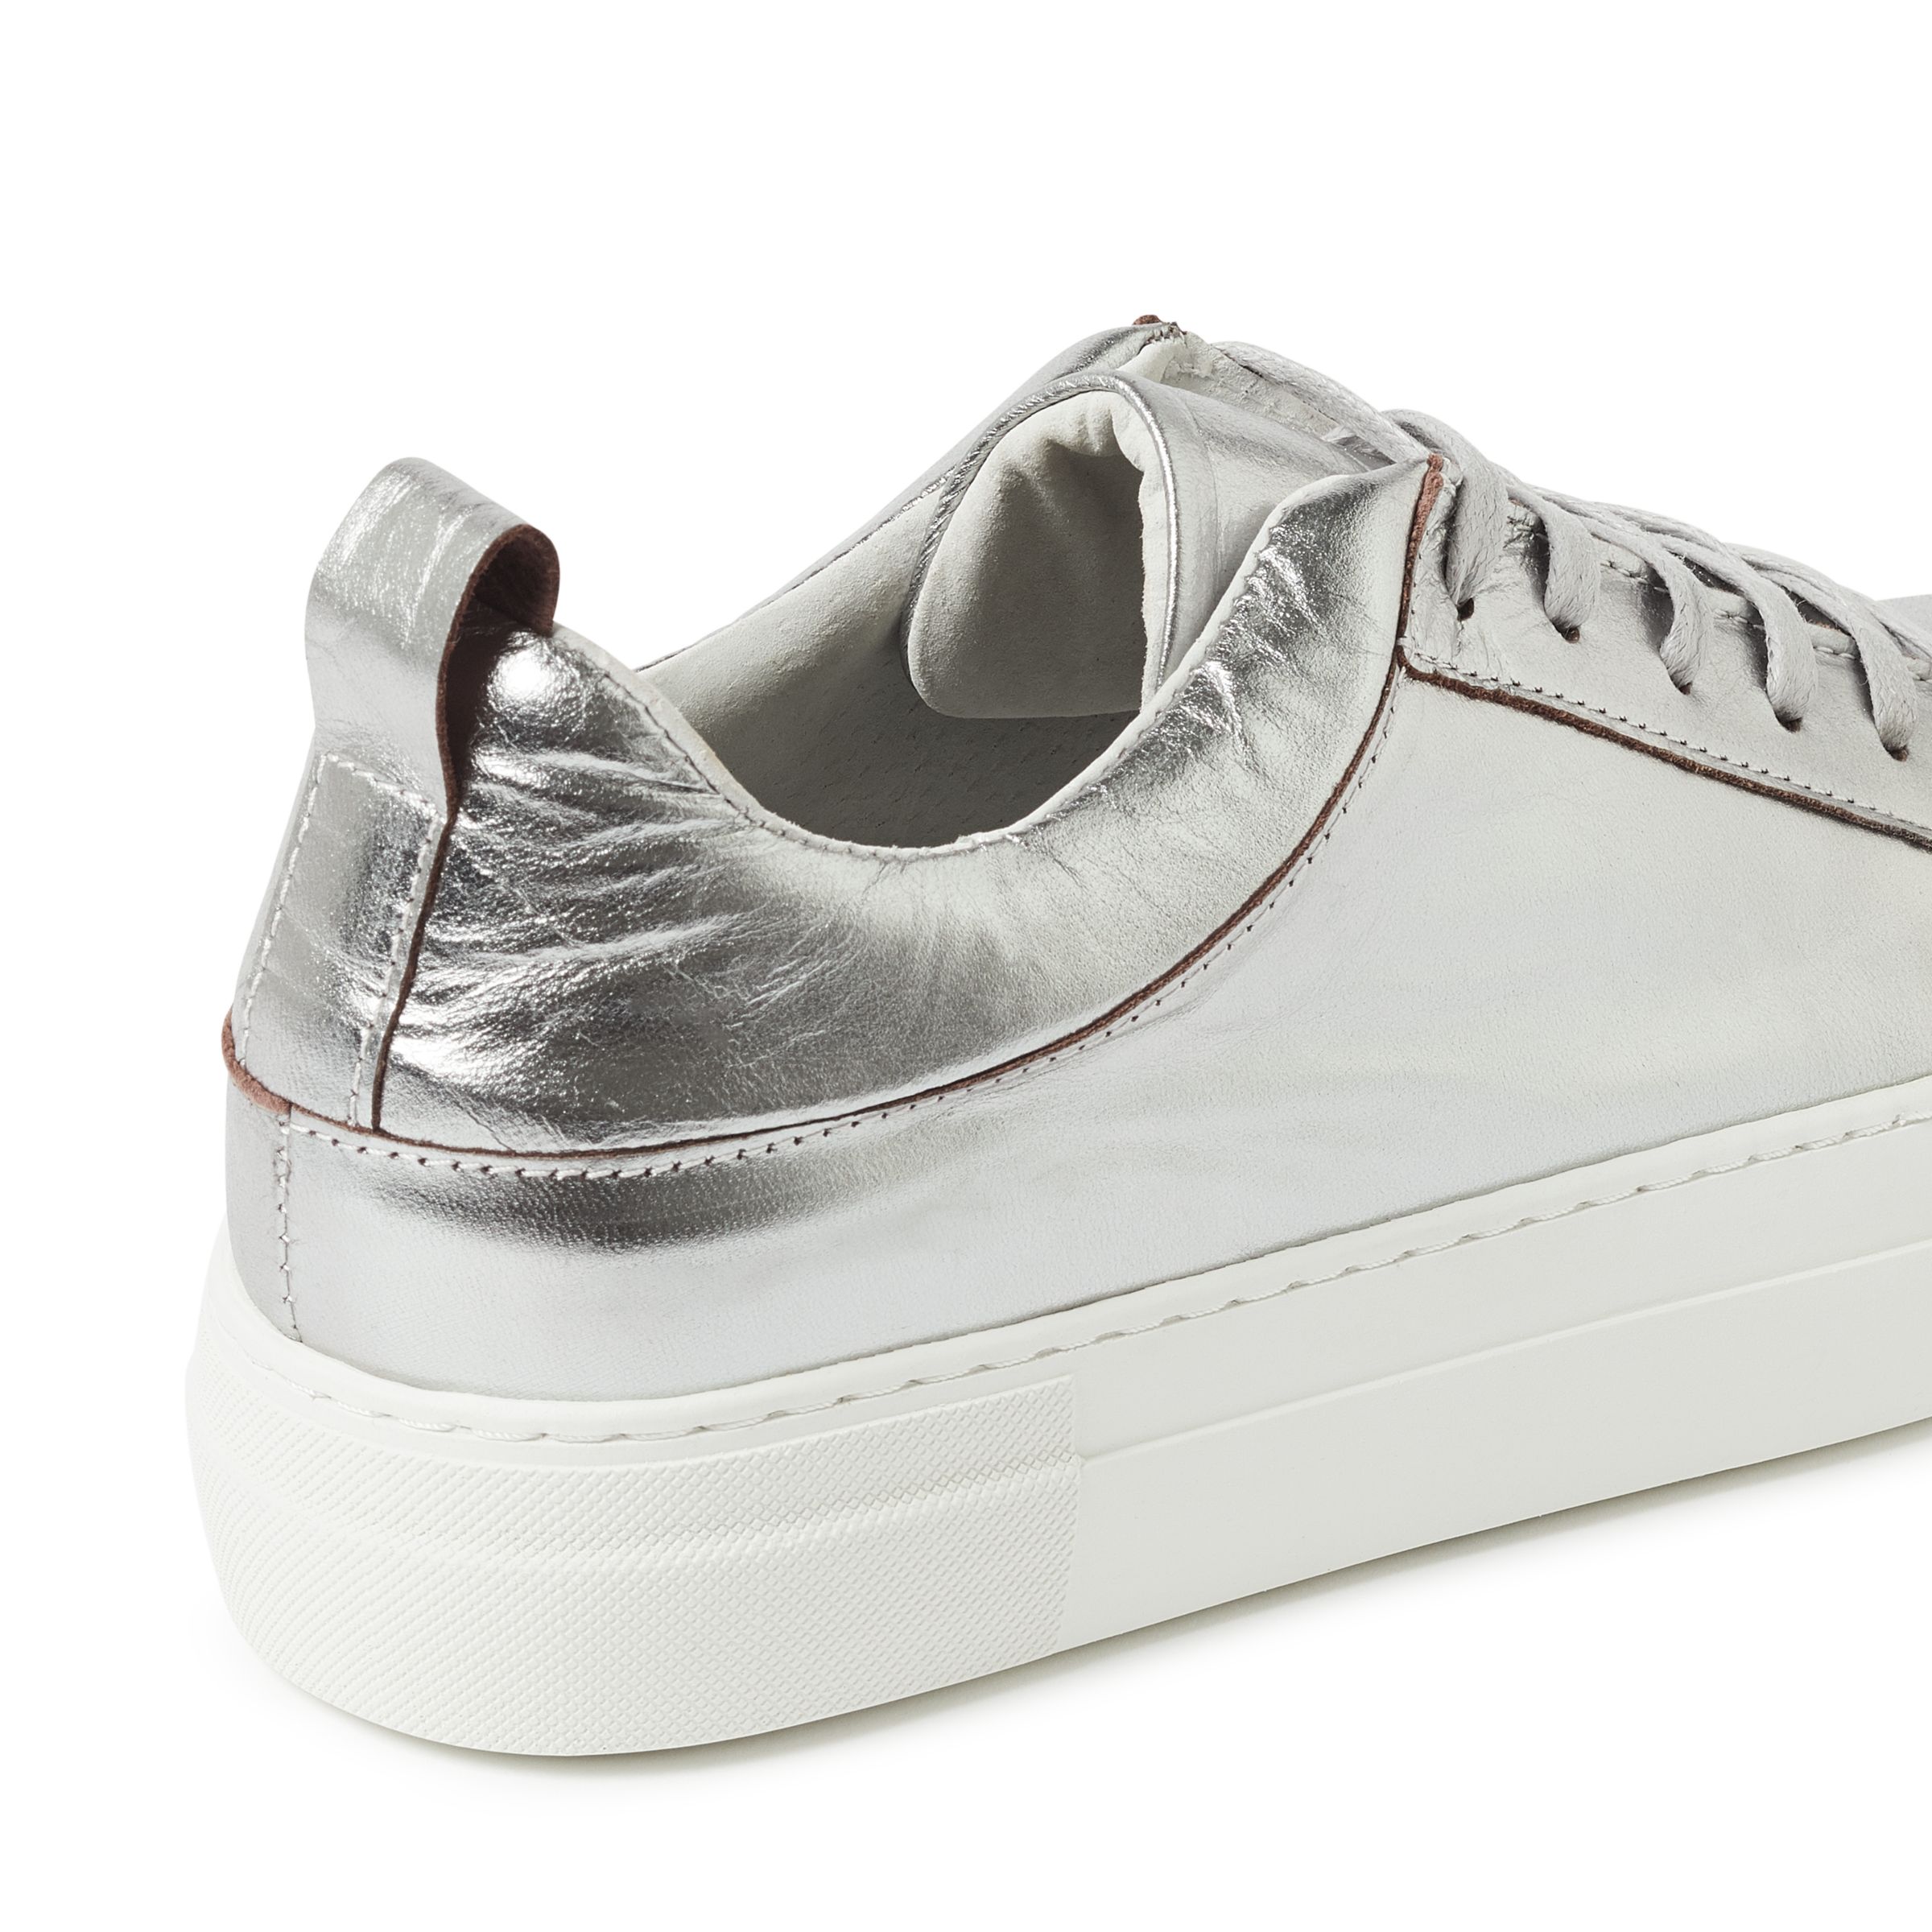 Pieces Paulina Leather Trainers, Silver at John Lewis & Partners